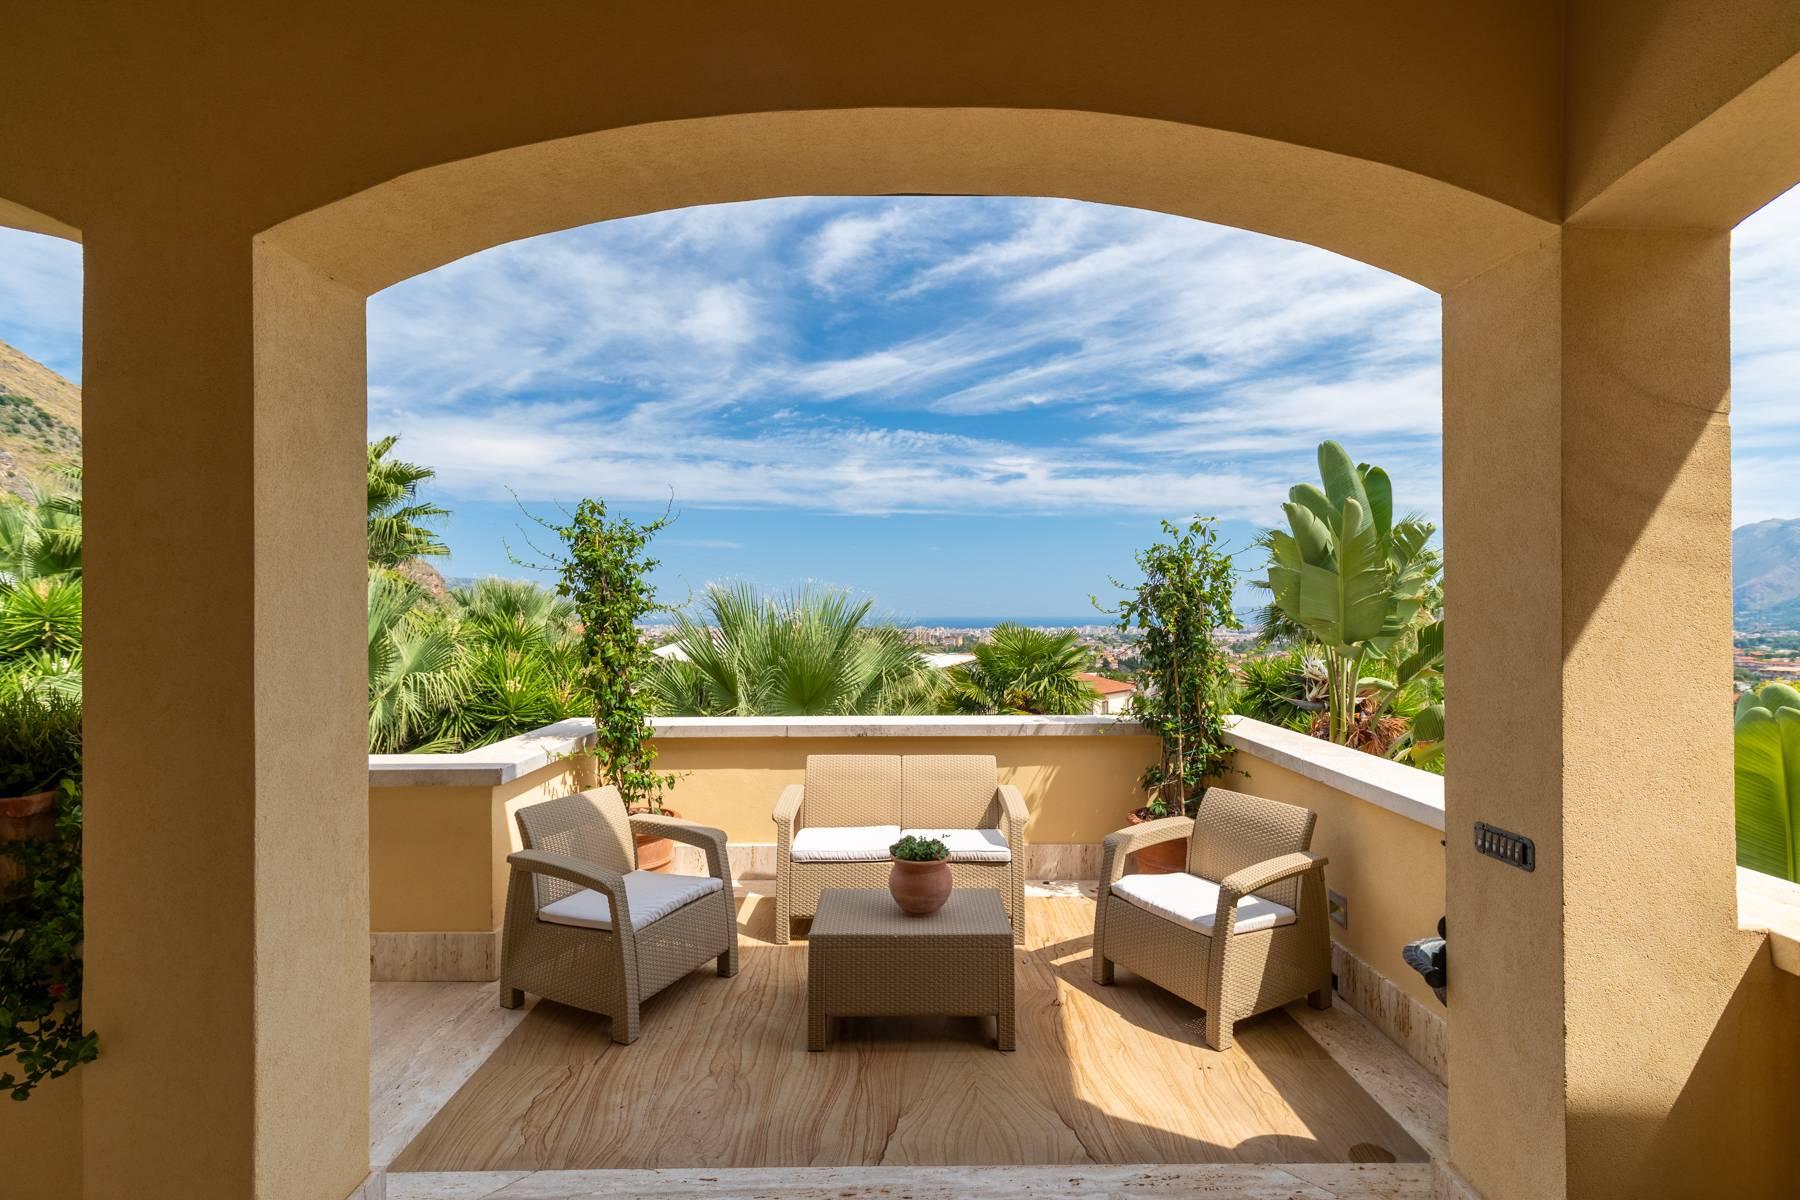 BEAUTIFUL ESTATE IN MONREALE WITH BREATHTAKING VIEWS OF THE GULF OF PALERMO - 16